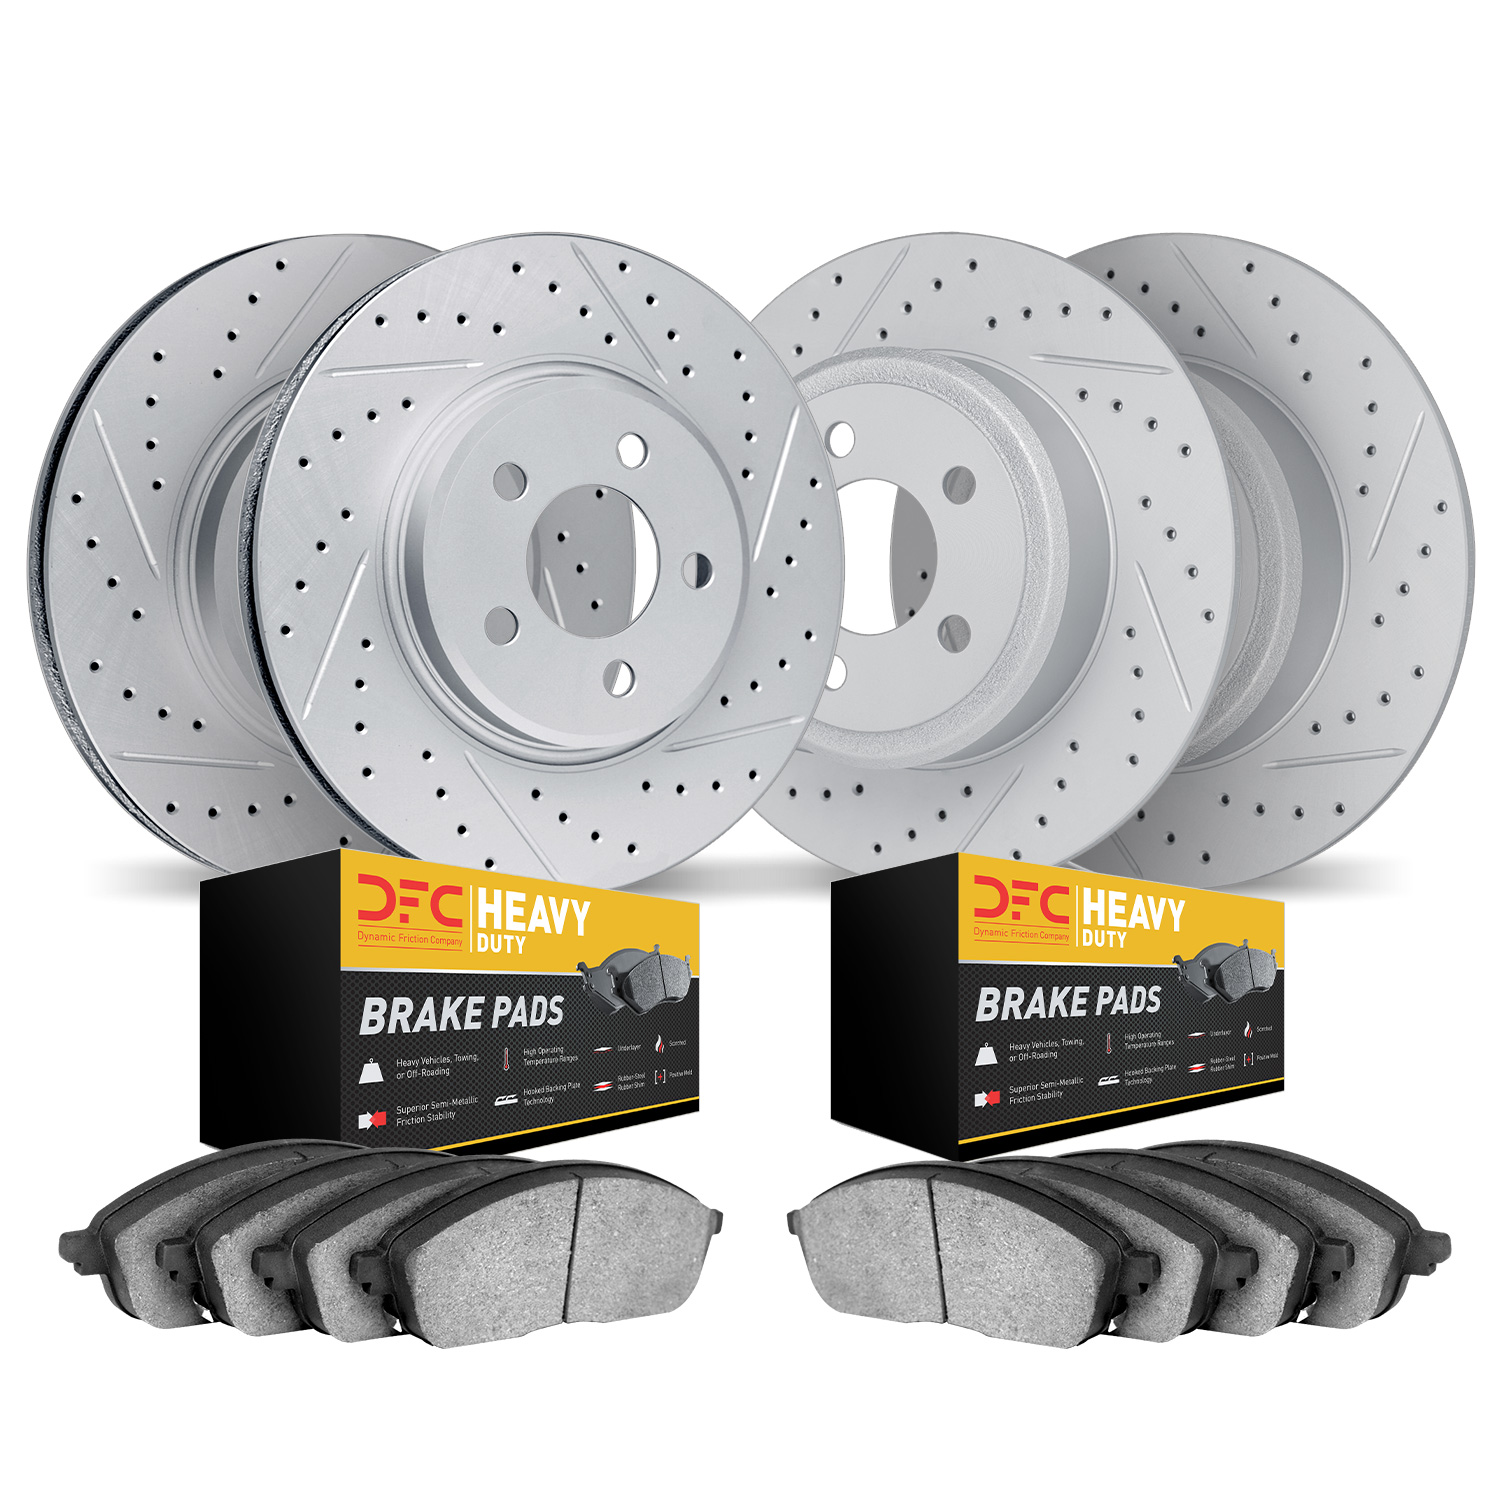 2204-42026 Geoperformance Drilled/Slotted Rotors w/Heavy-Duty Pads Kit, 1993-1994 Mopar, Position: Front and Rear